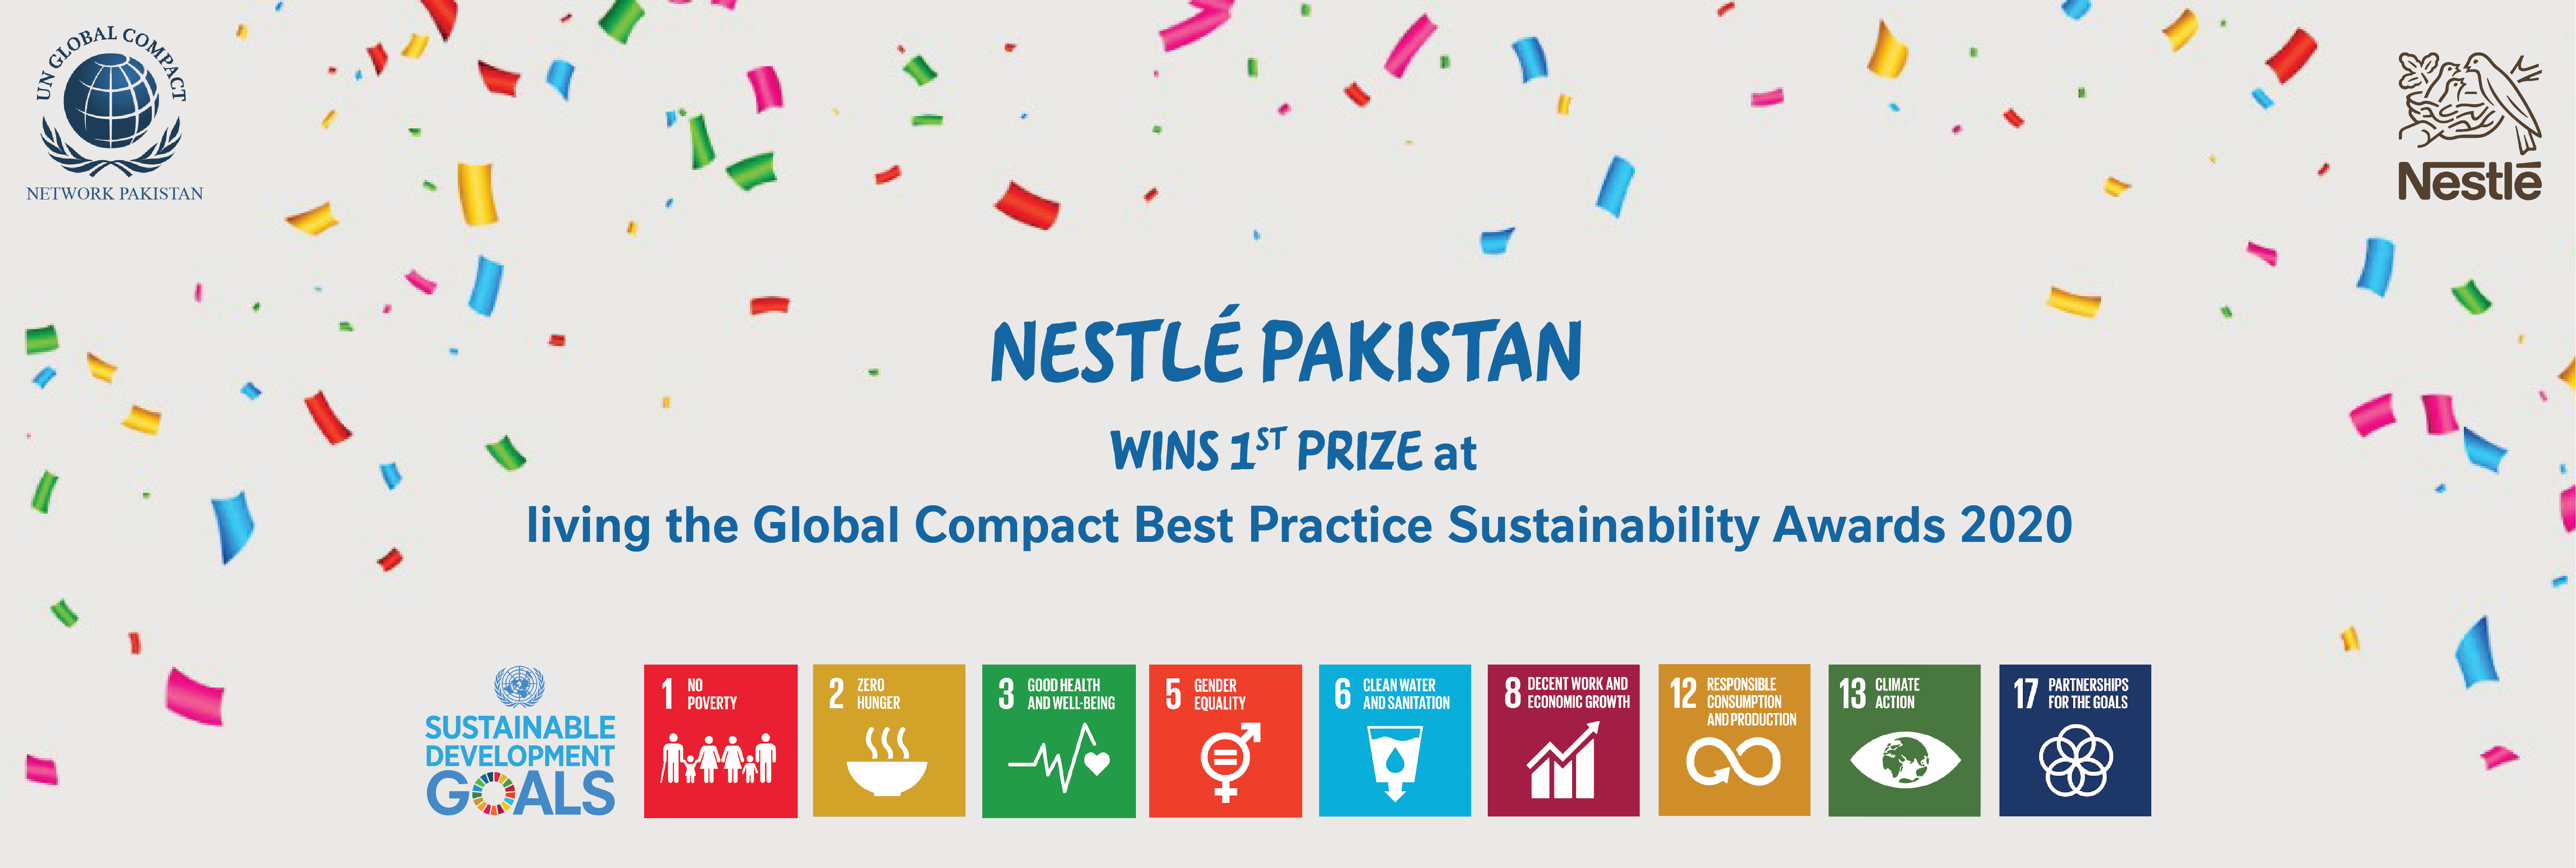 Nestlé Pakistan awarded Living the Global Compact Best Practice Sustainability Awards 2020 for the Fifth Consecutive Time